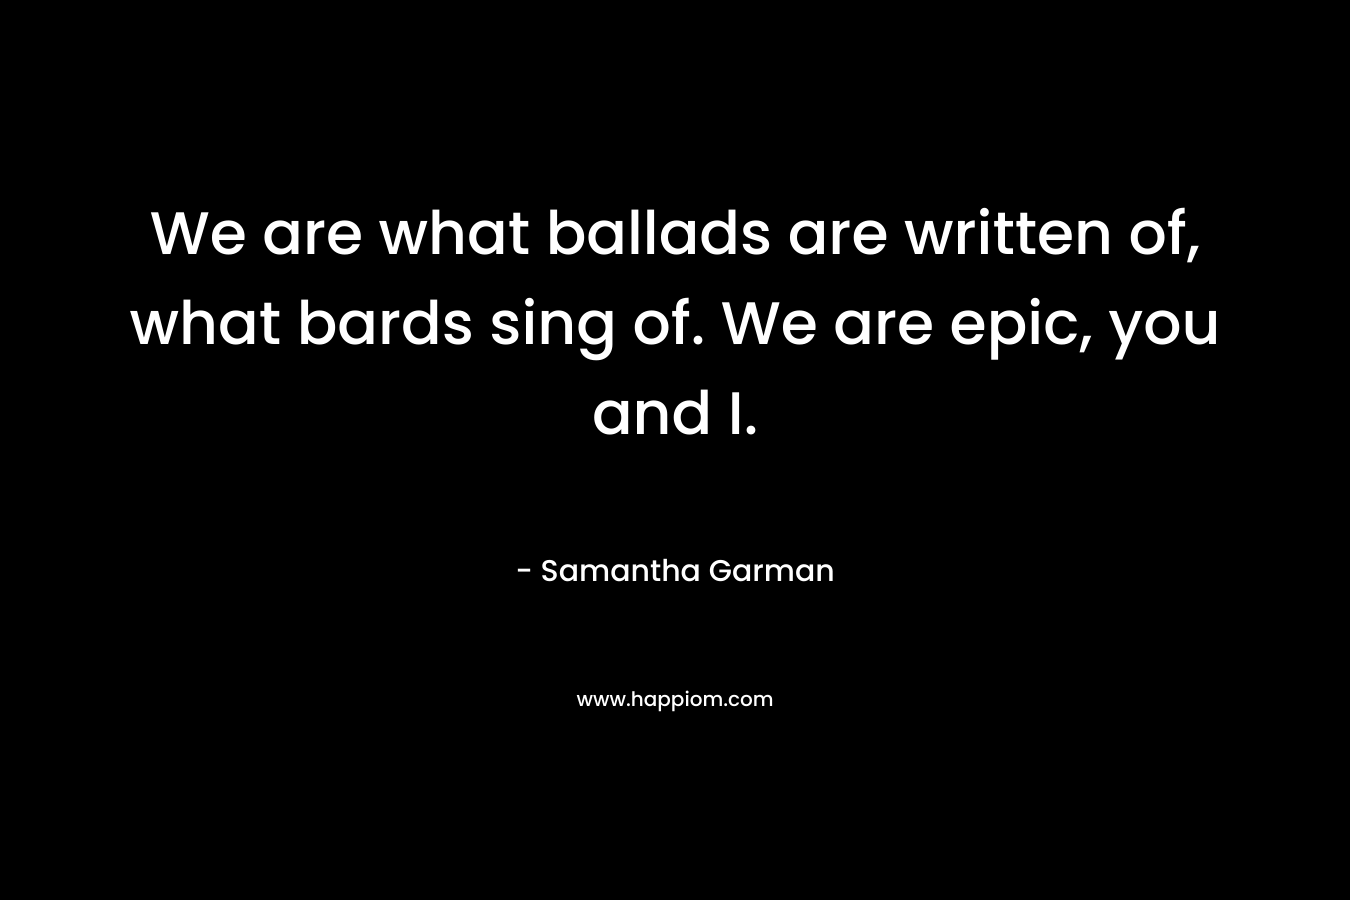 We are what ballads are written of, what bards sing of. We are epic, you and I. – Samantha Garman